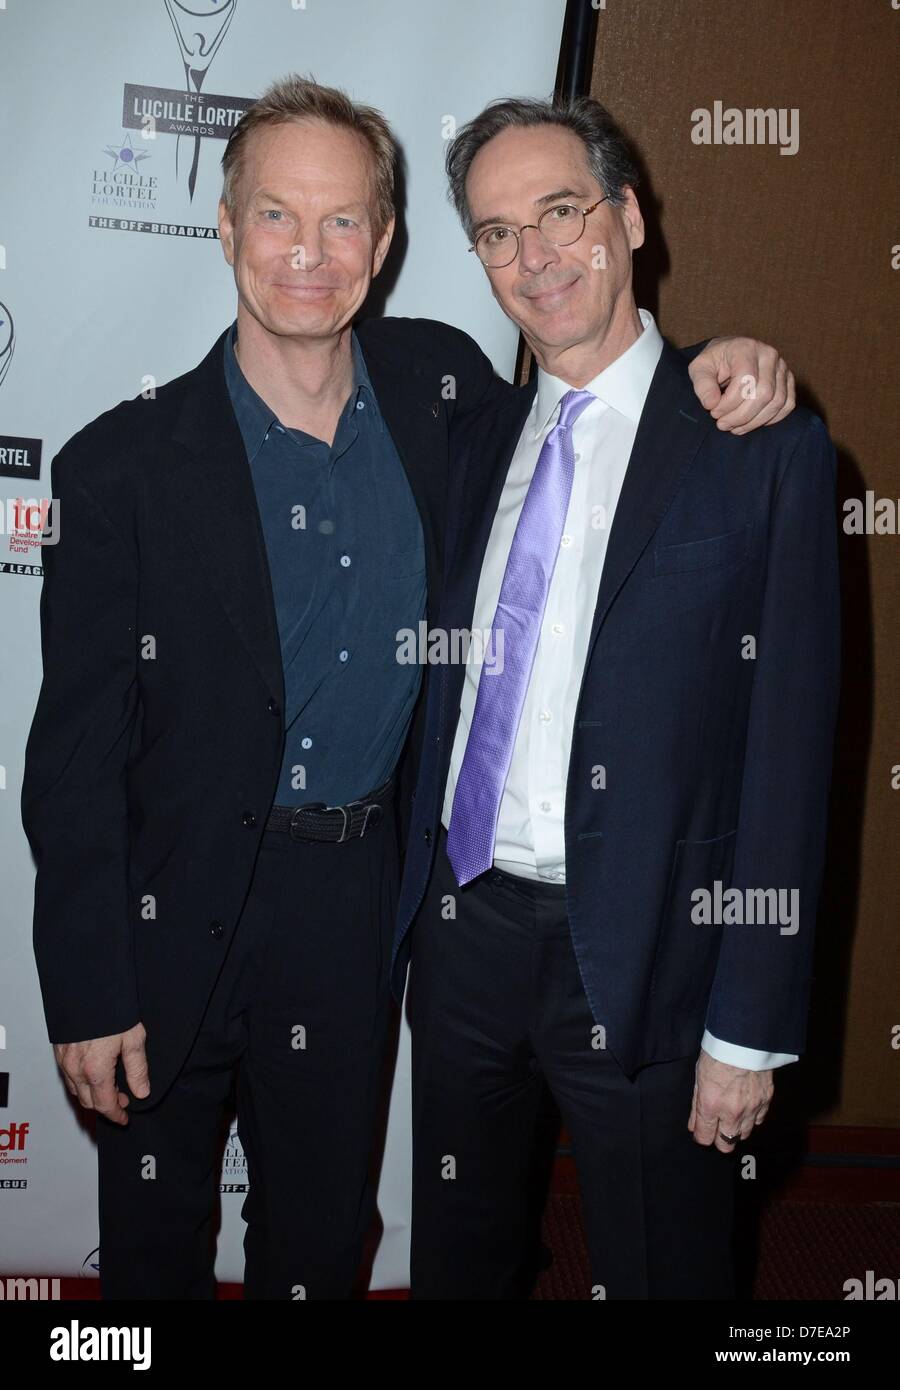 New York, USA. 5th May 2013. Bill Irwin, David Shiner at arrivals for The 28th Lucille Lortel Awards, NYU Skirball Center, New York, NY May 5, 2013. Photo By: Derek Storm/Everett Collection/Alamy Live News Stock Photo